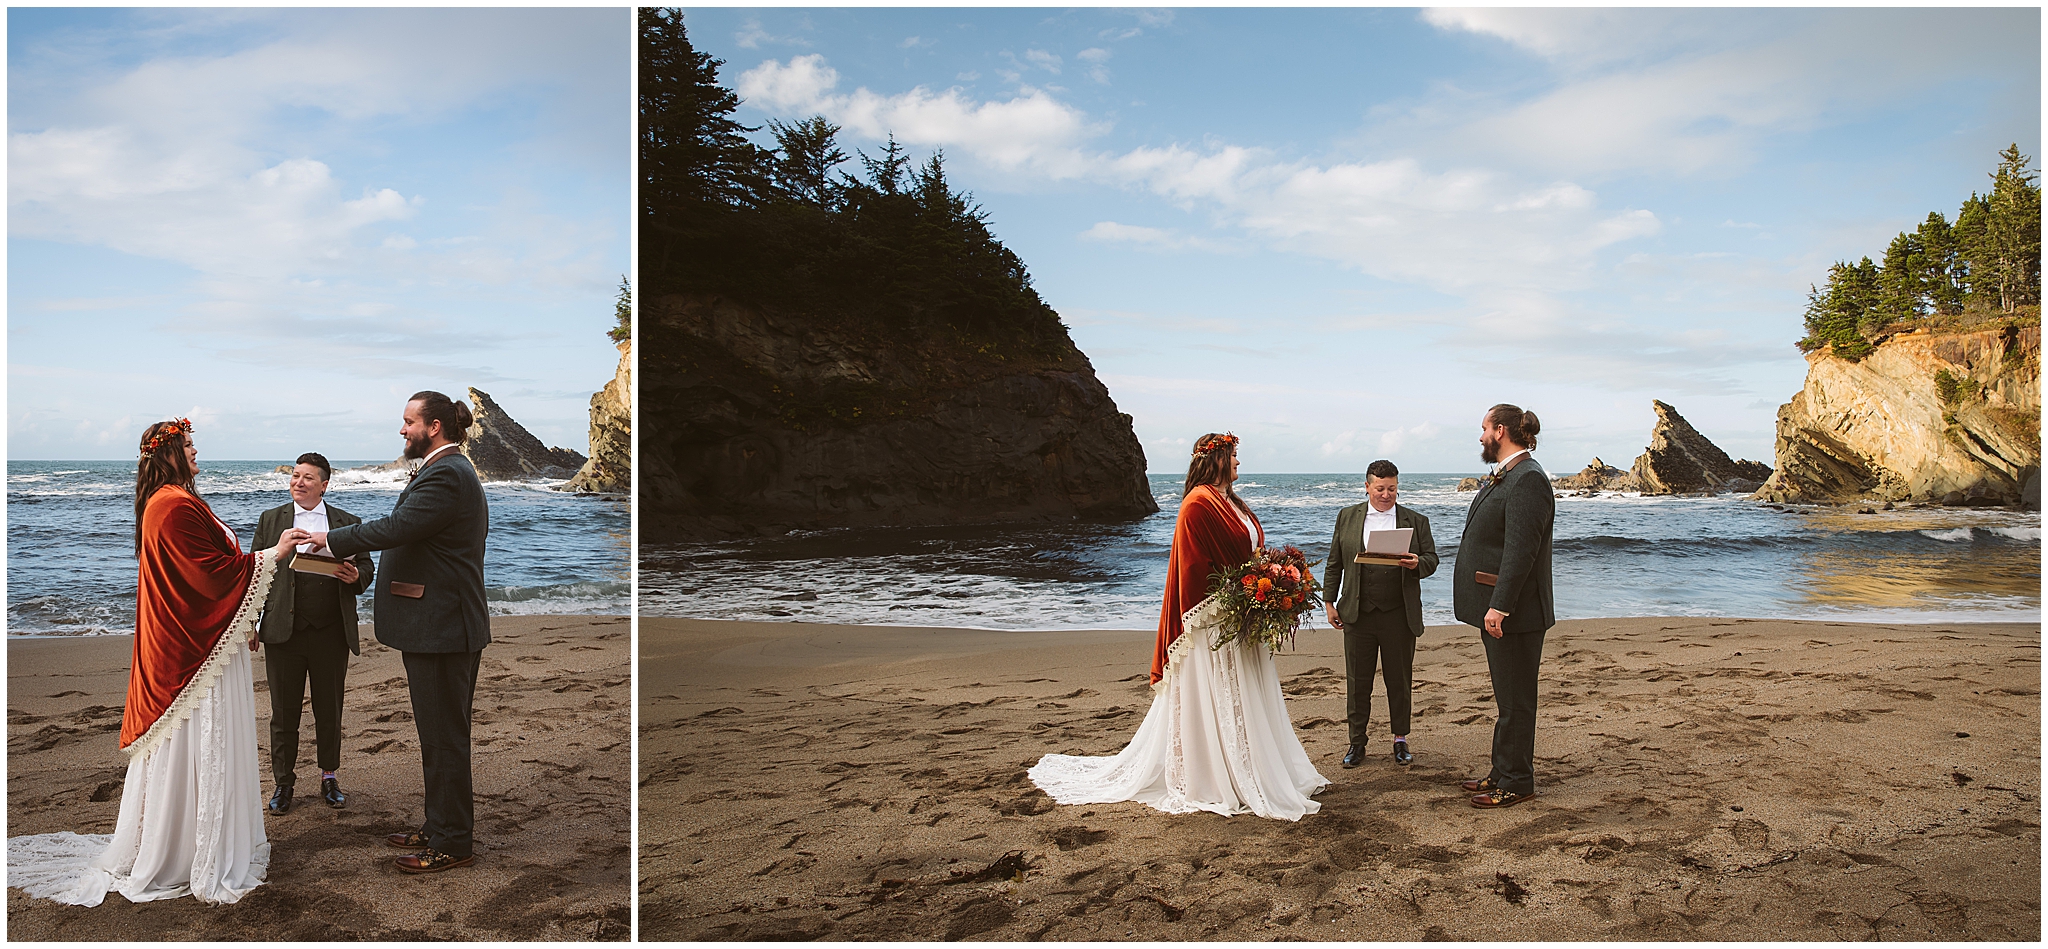 An Oregon coast elopement photo of a bride and groom during their ceremony at Shore Acres State Park